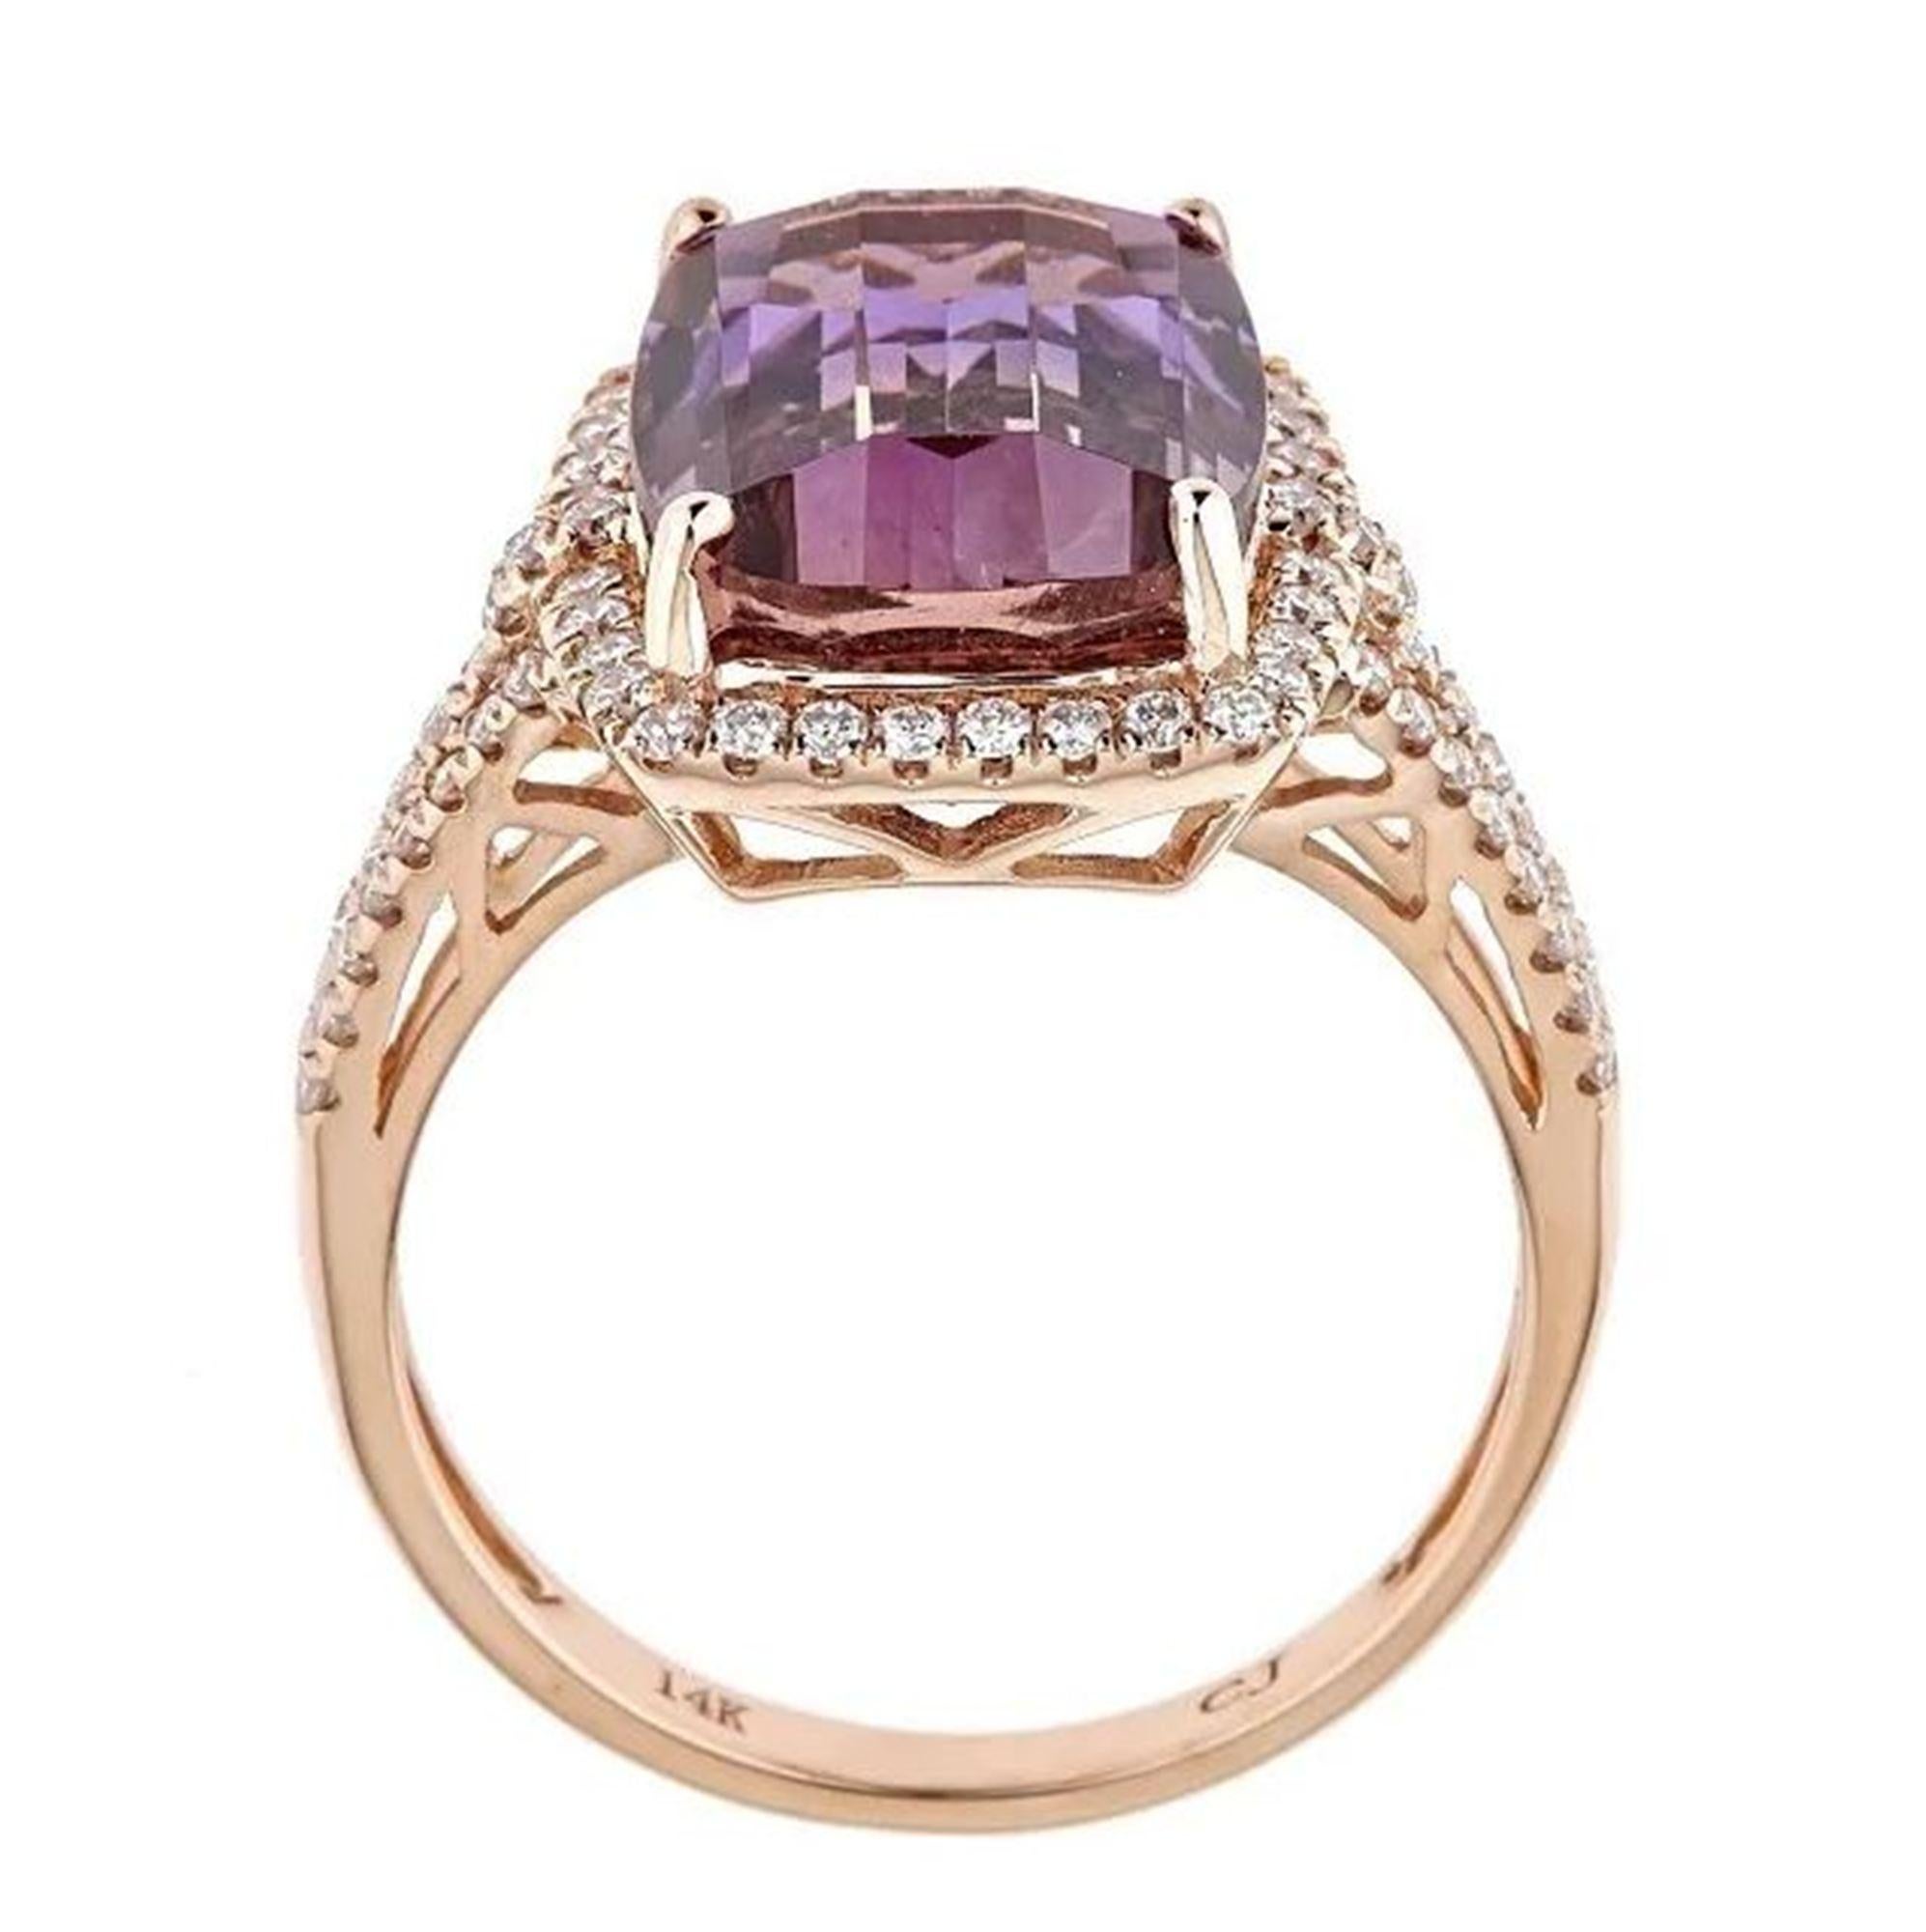 Stunning, timeless and classy eternity Unique Ring. Decorate yourself in luxury with this Gin & Grace Ring. The 14K Rose Gold jewelry boasts with Cushion-cut Ametrine 1 pcs 5.32 carat, Natural Round-cut white Diamond (70 Pcs) 0.44 Carat accent